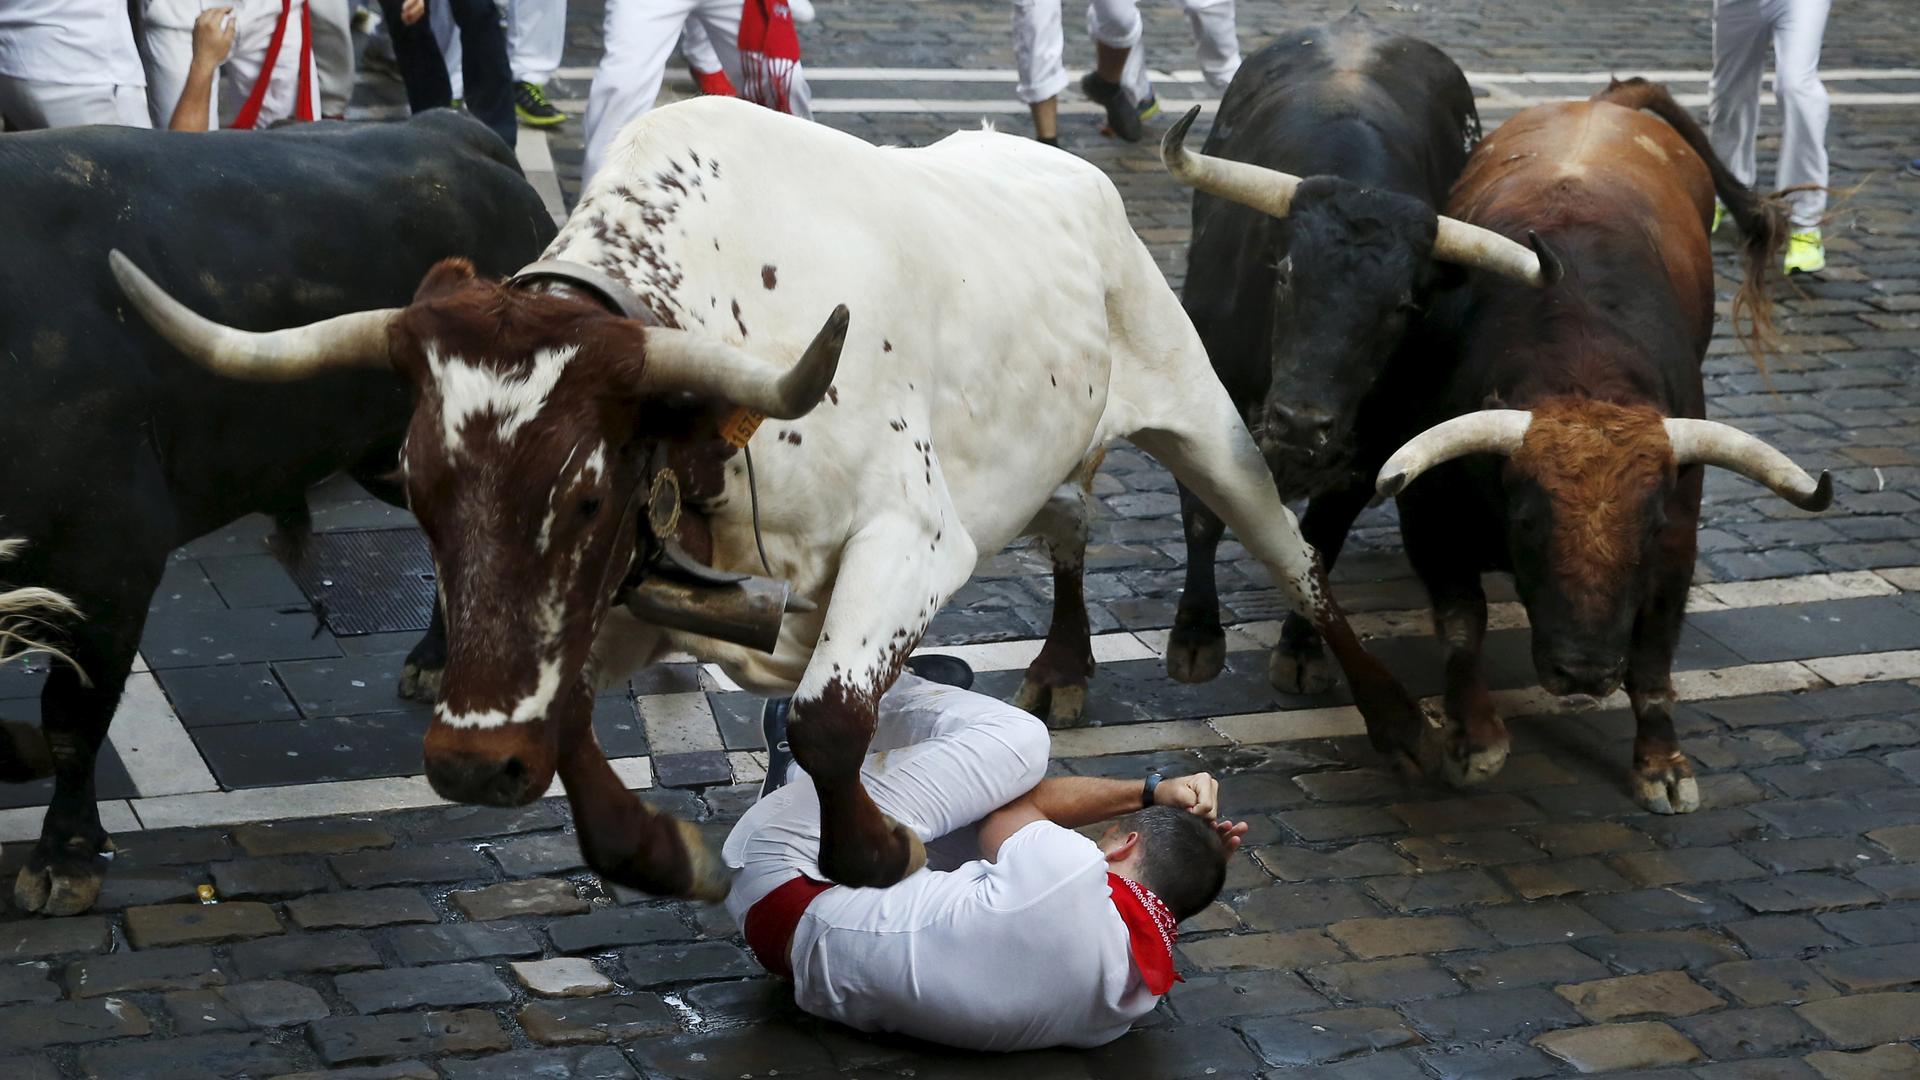 Steer jumps over a runner during the running of the bulls in Pamplona